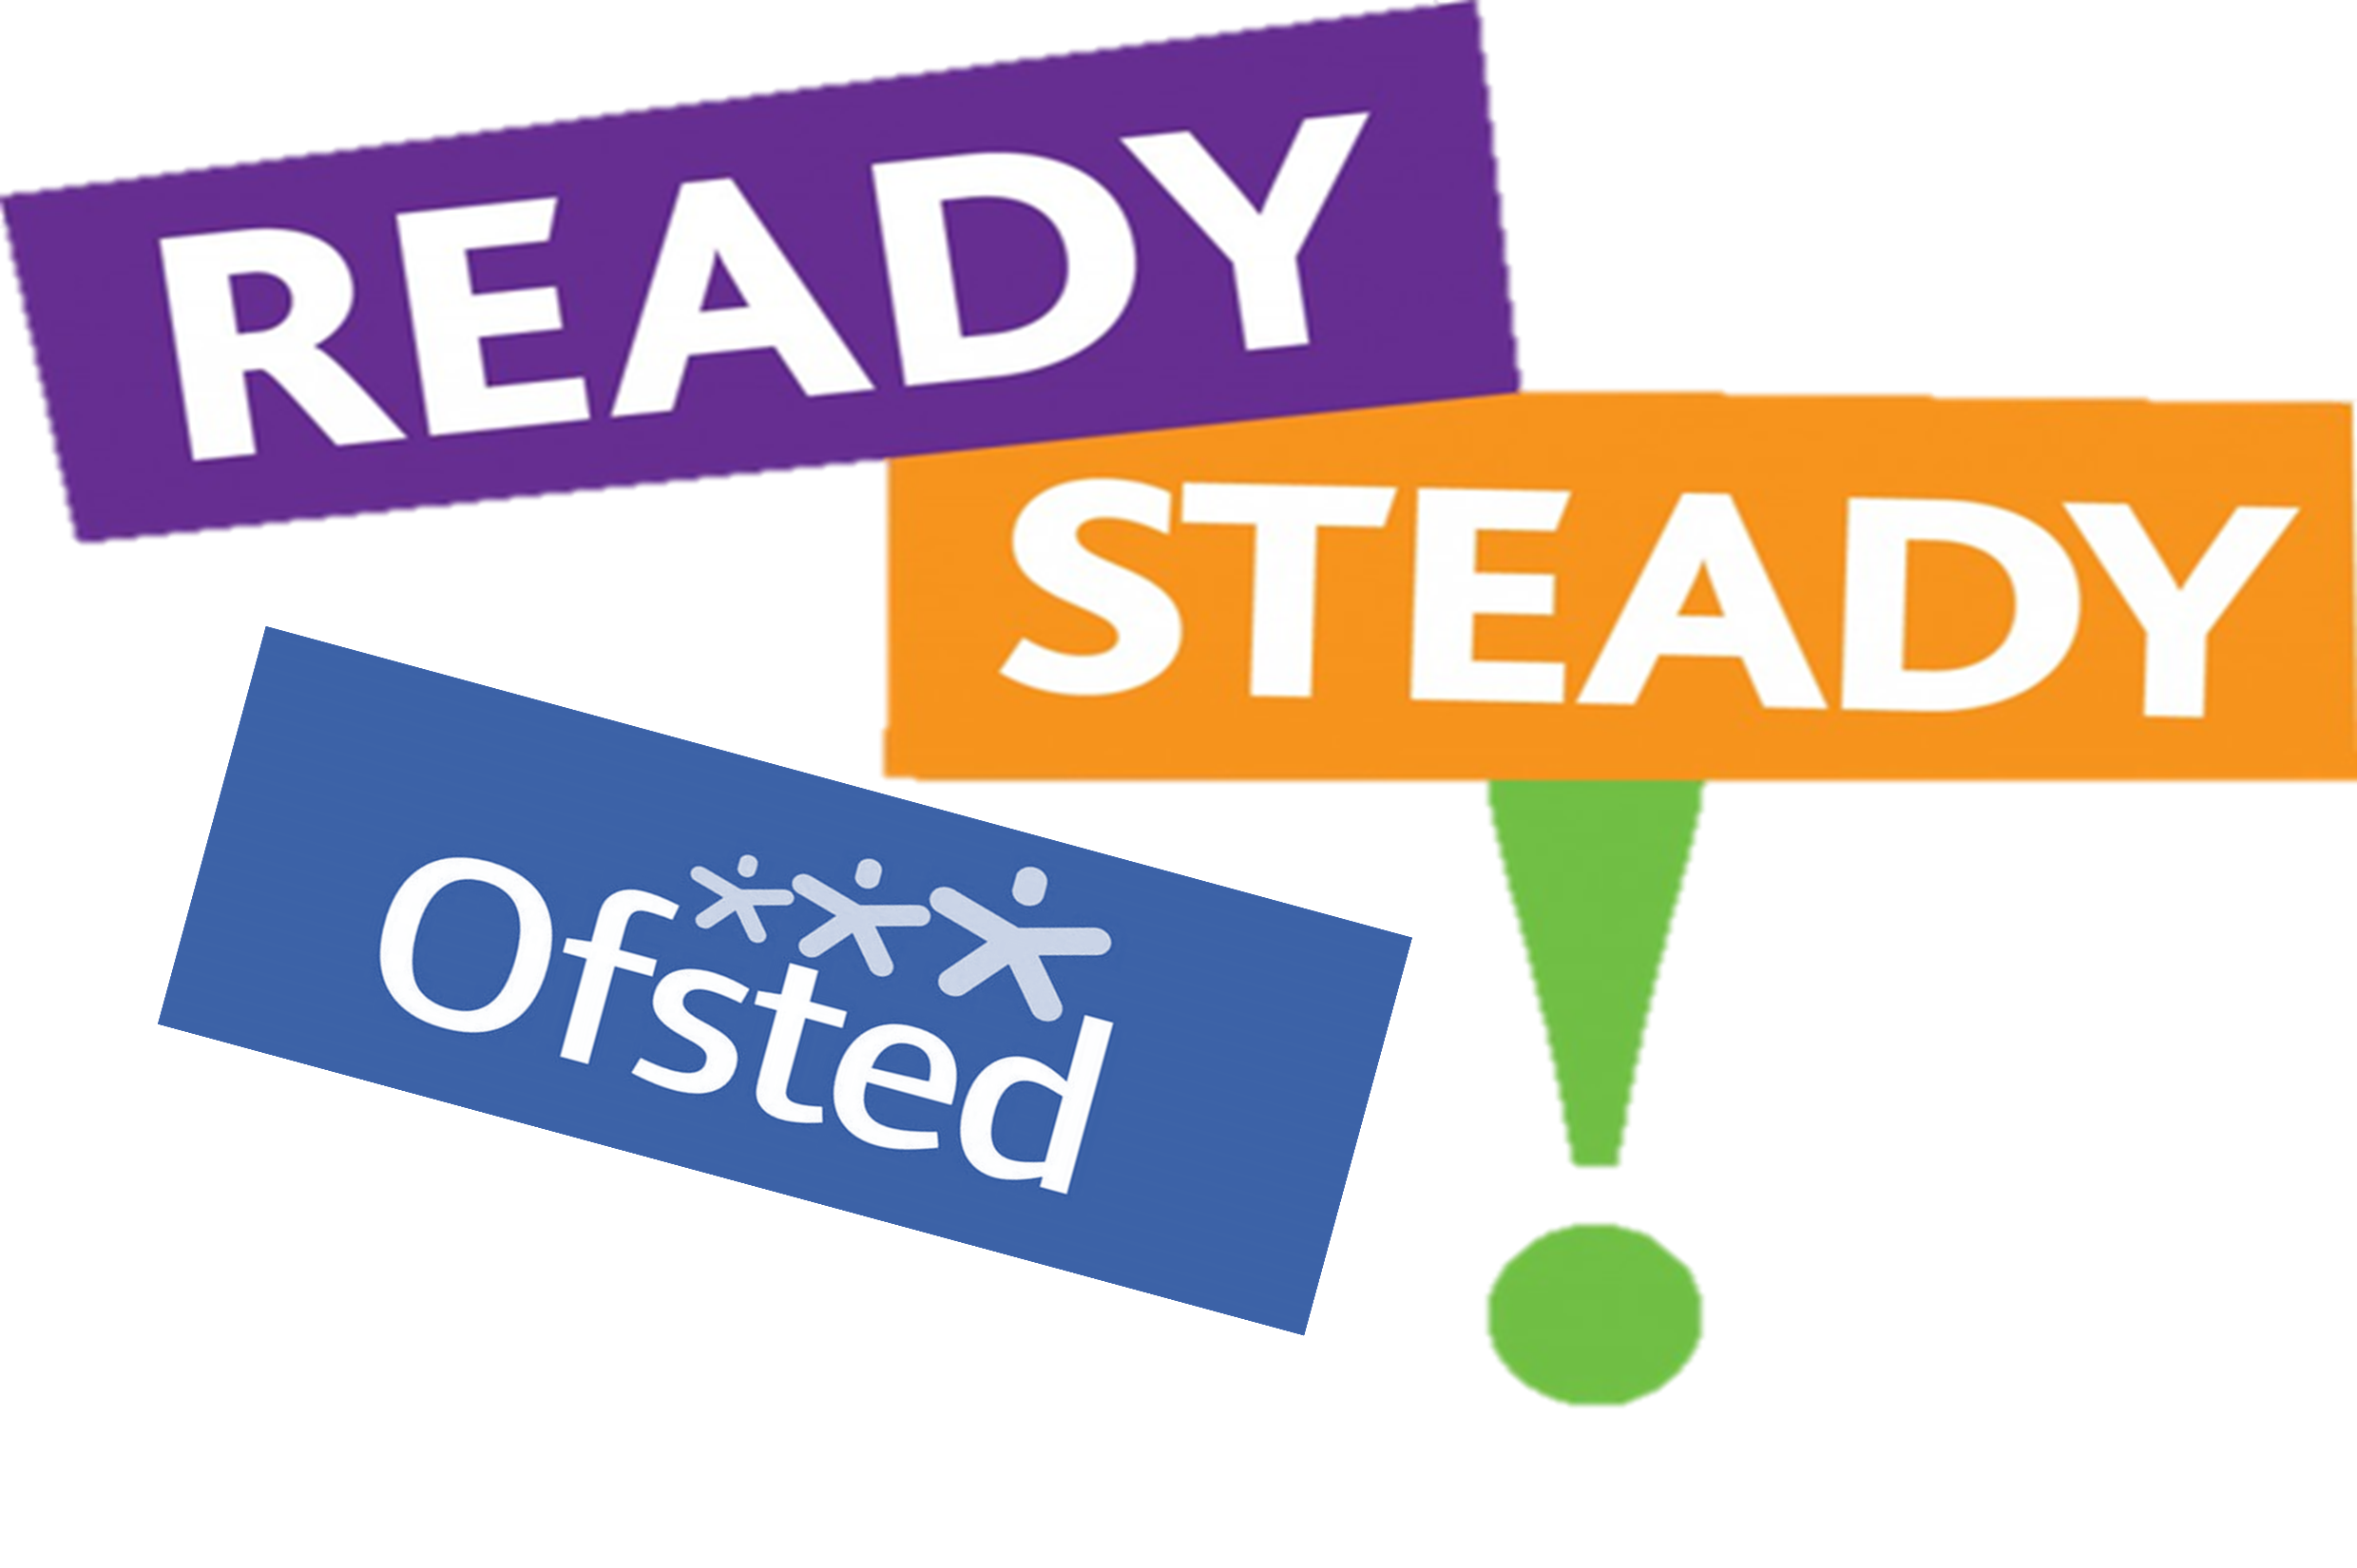 Ready steady OFSTED image.png